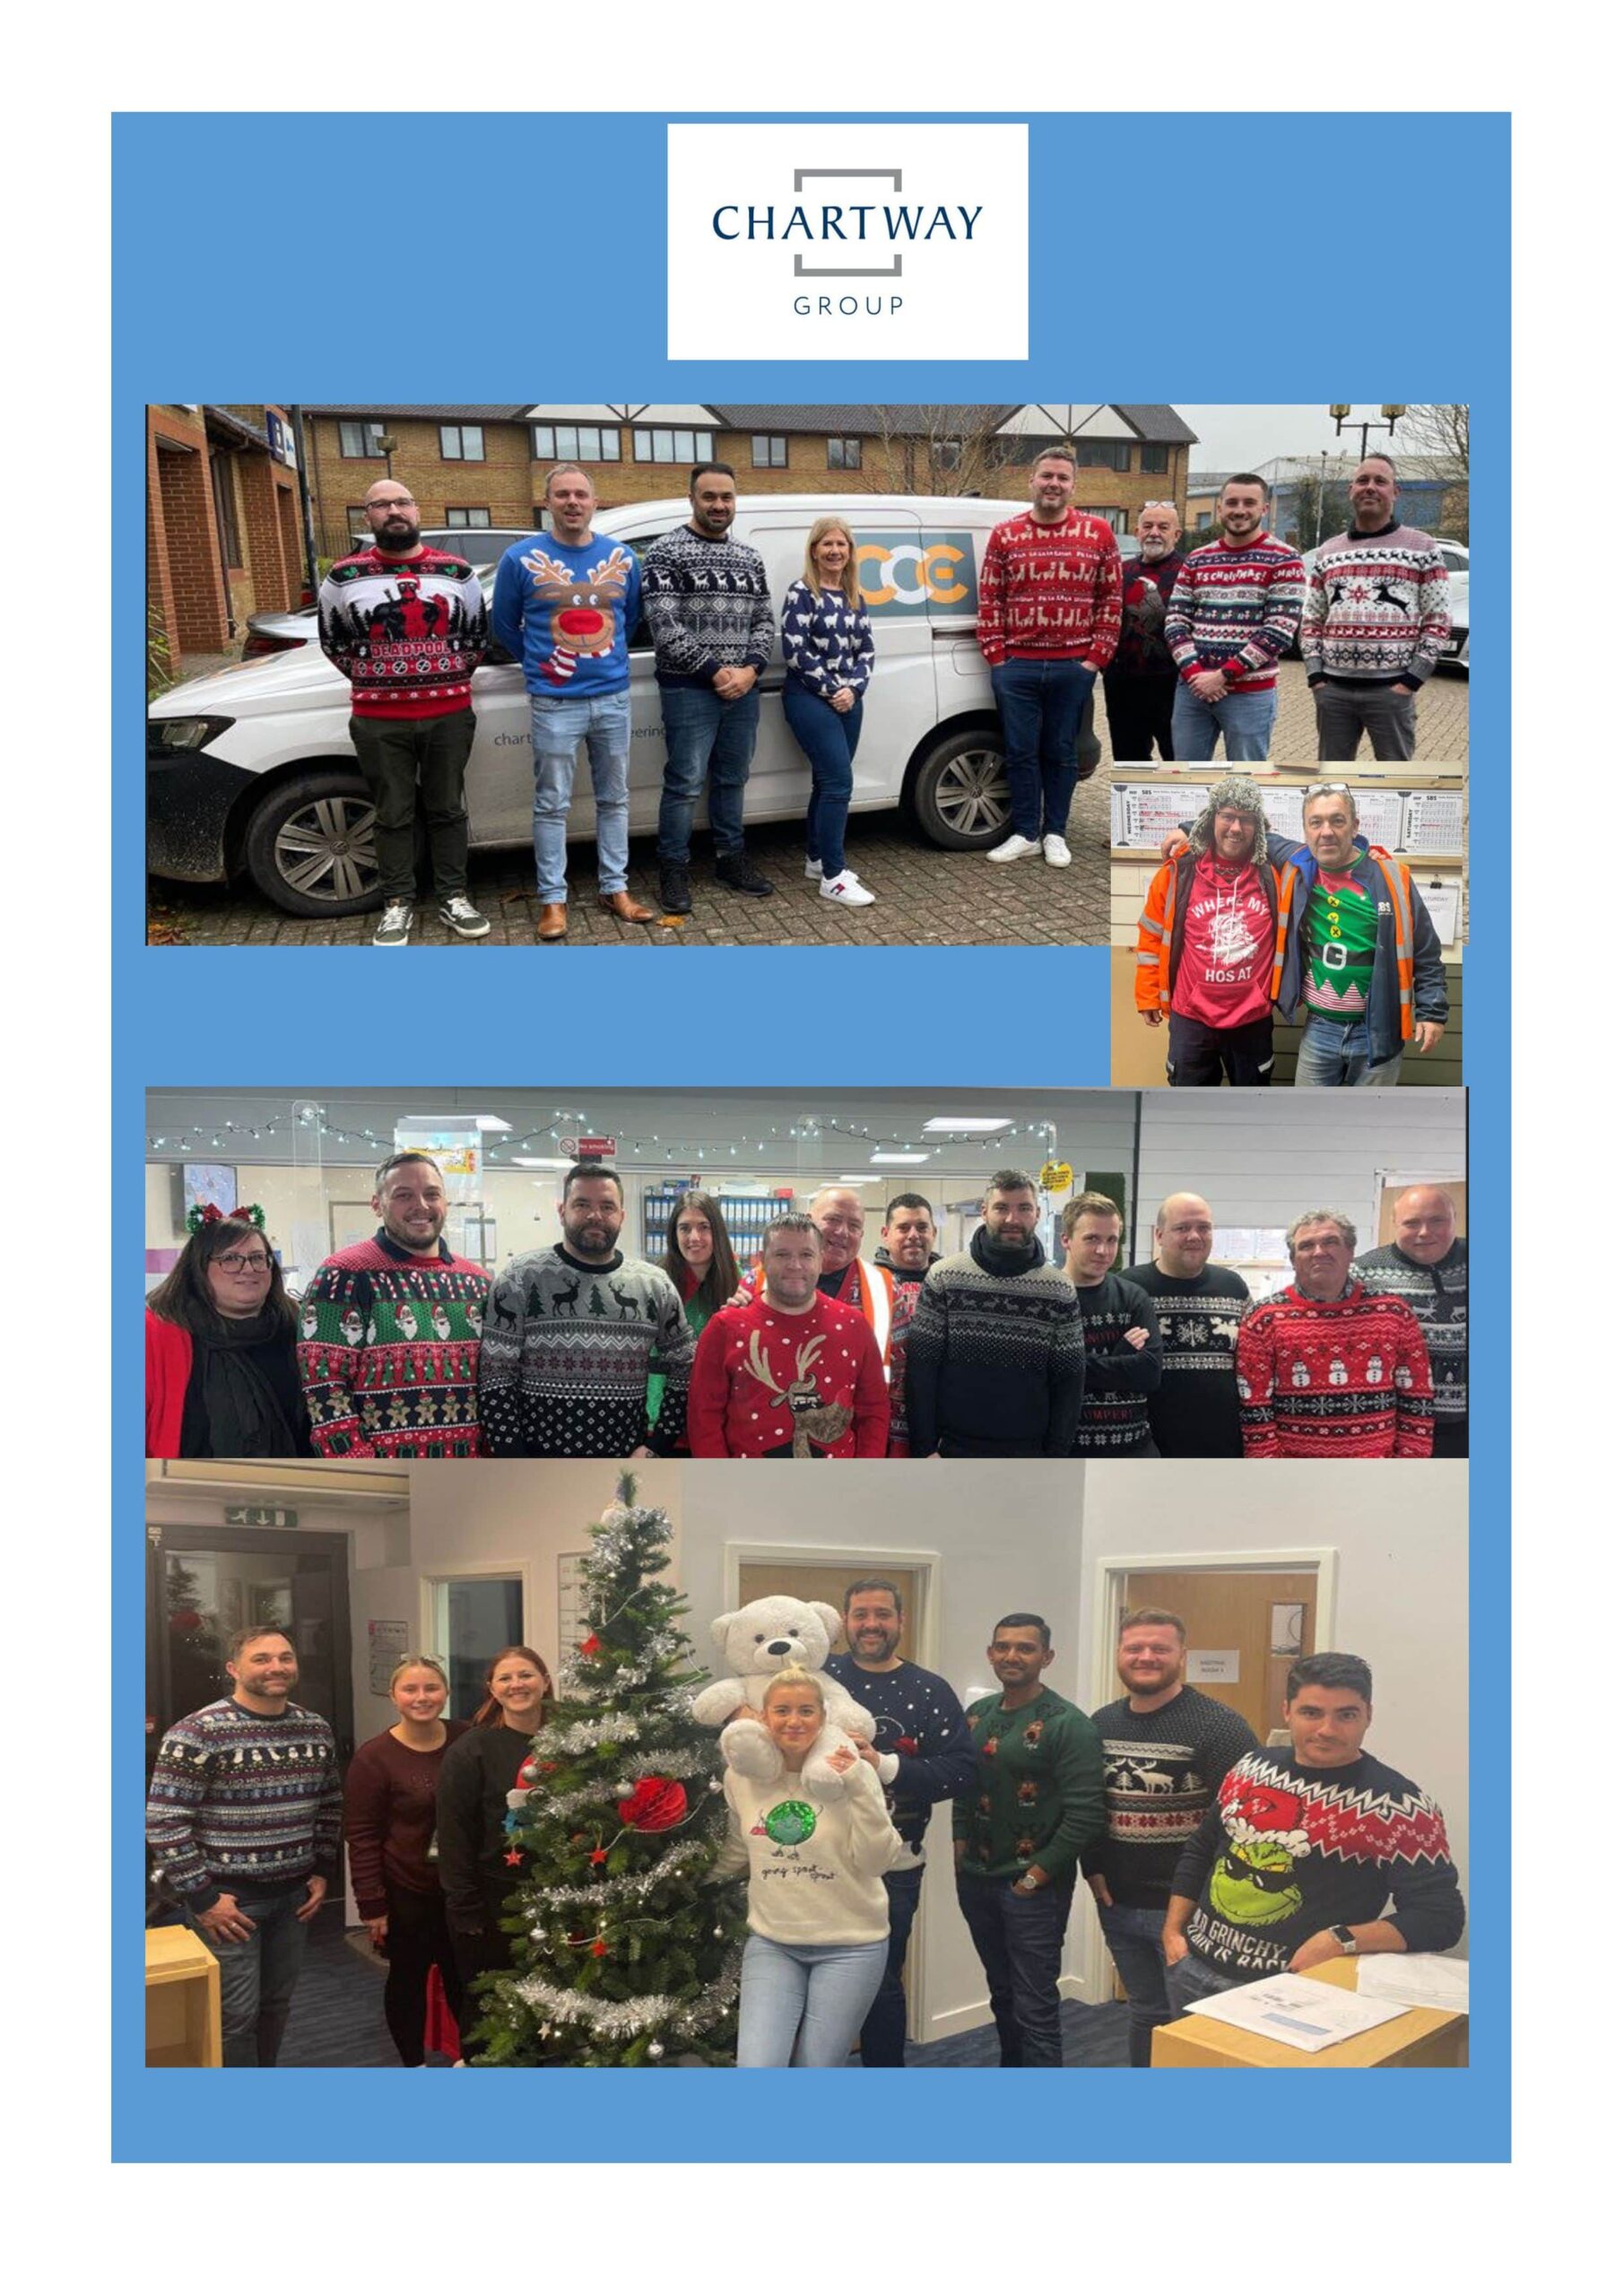 We wore Christmas jumpers to work on Friday 9th December.